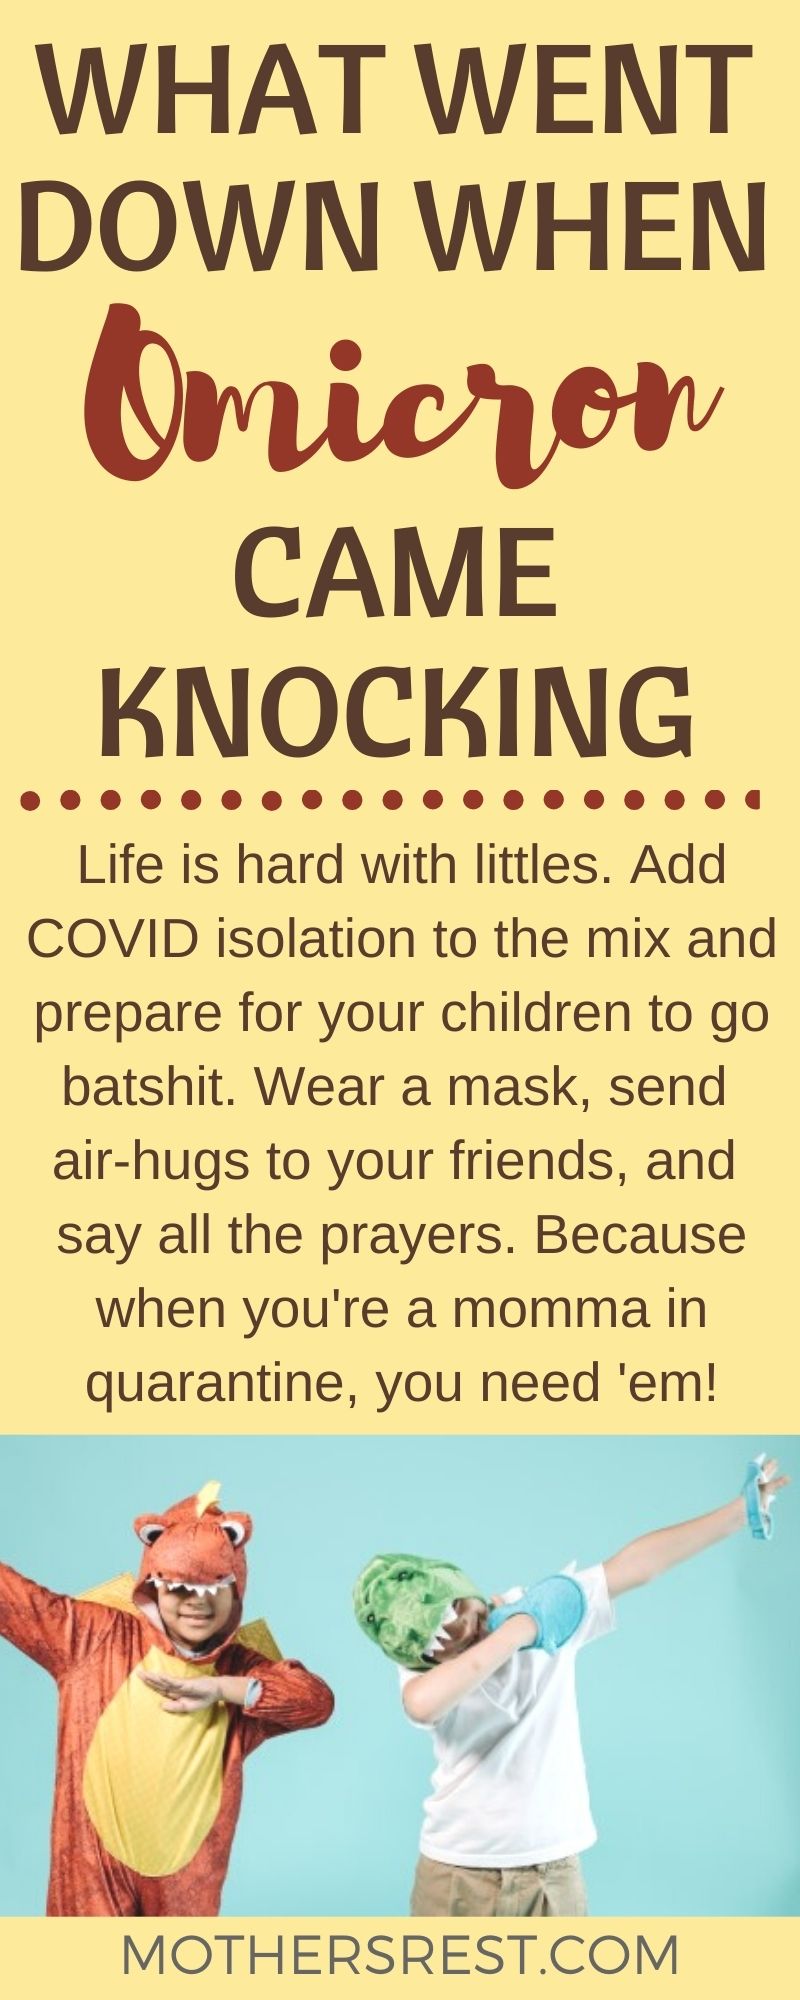 Life is hard with littles. Add COVID isolation to the mix and prepare for your children to go batshit. Wear a mask, send air-hugs to your friends, and say all the prayers. Because when you are a momma in quarantine, you need them!